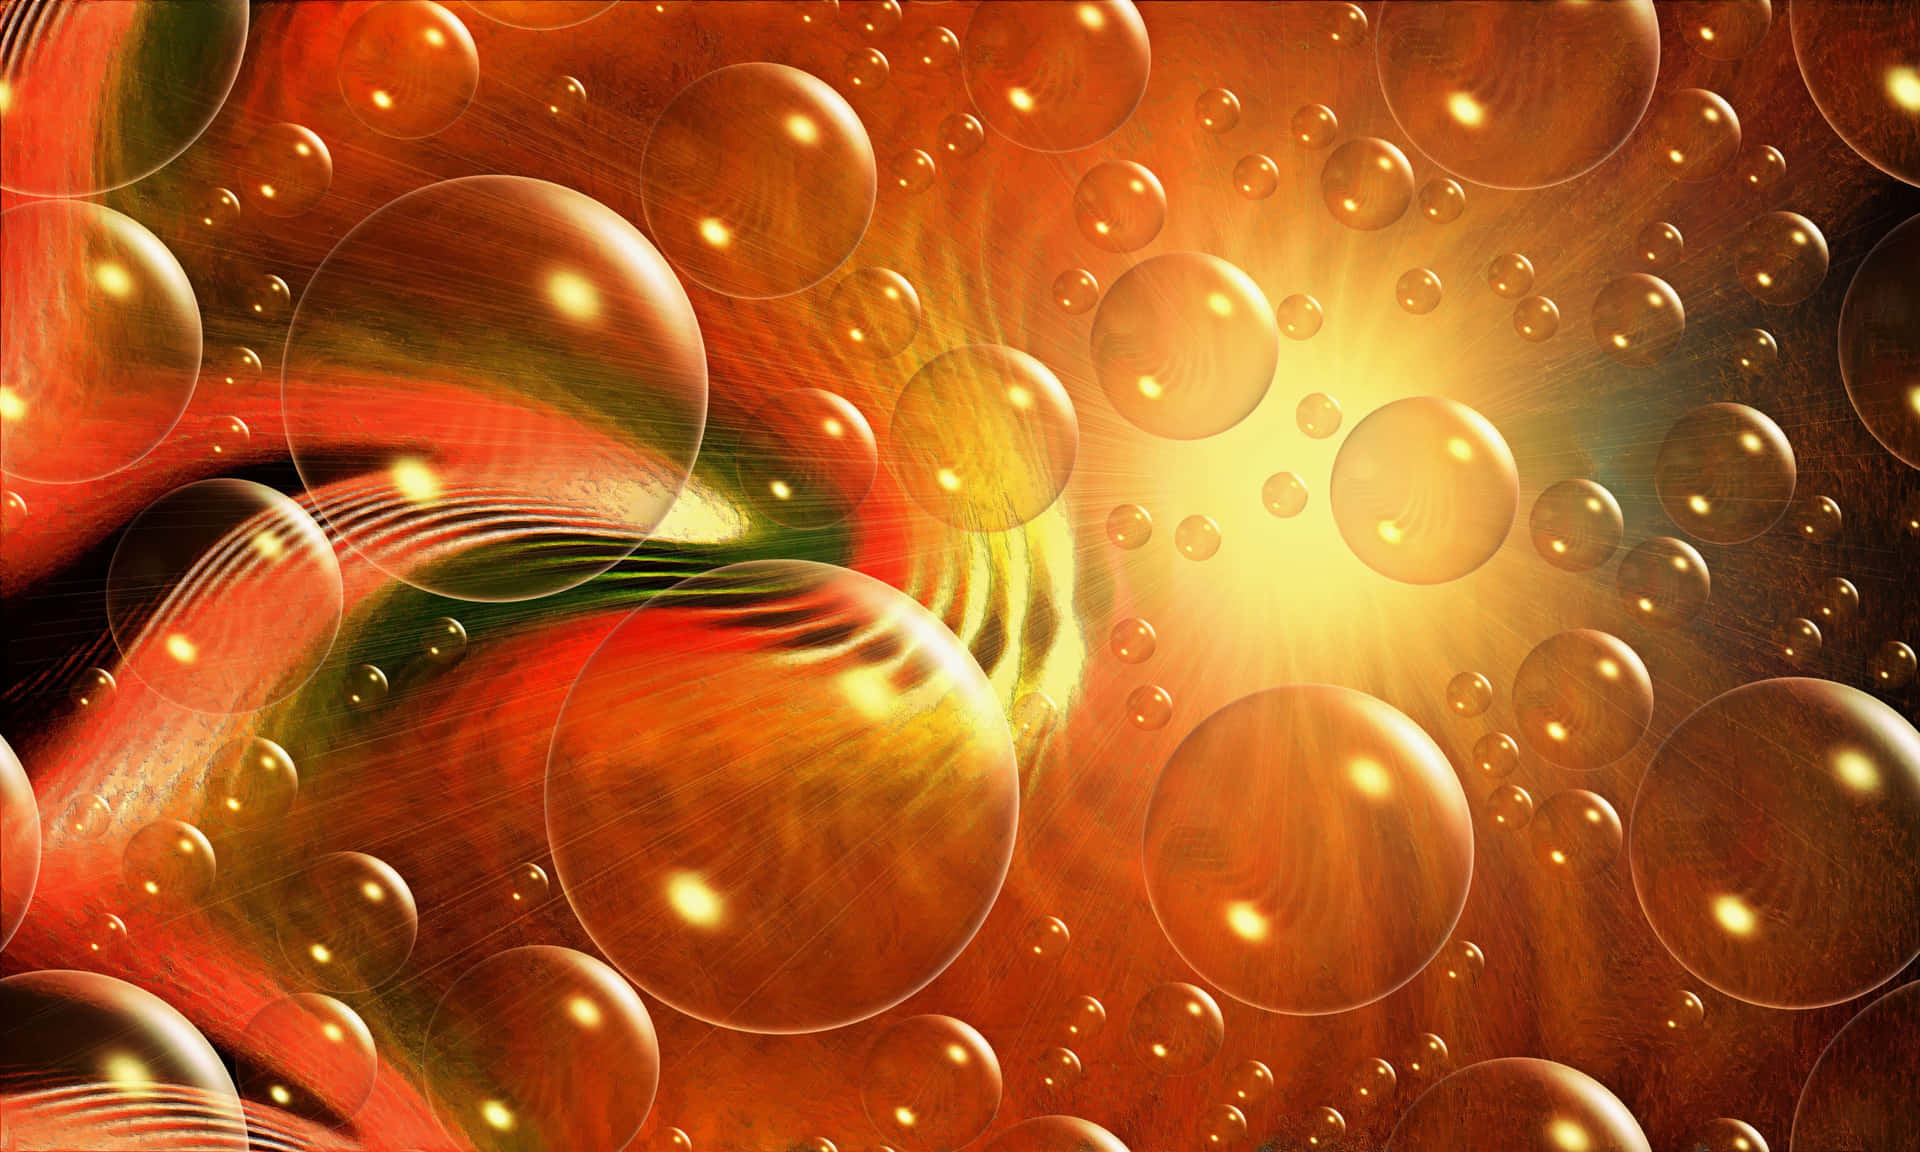 A Colorful Abstract Image Of Bubbles And Bubbles